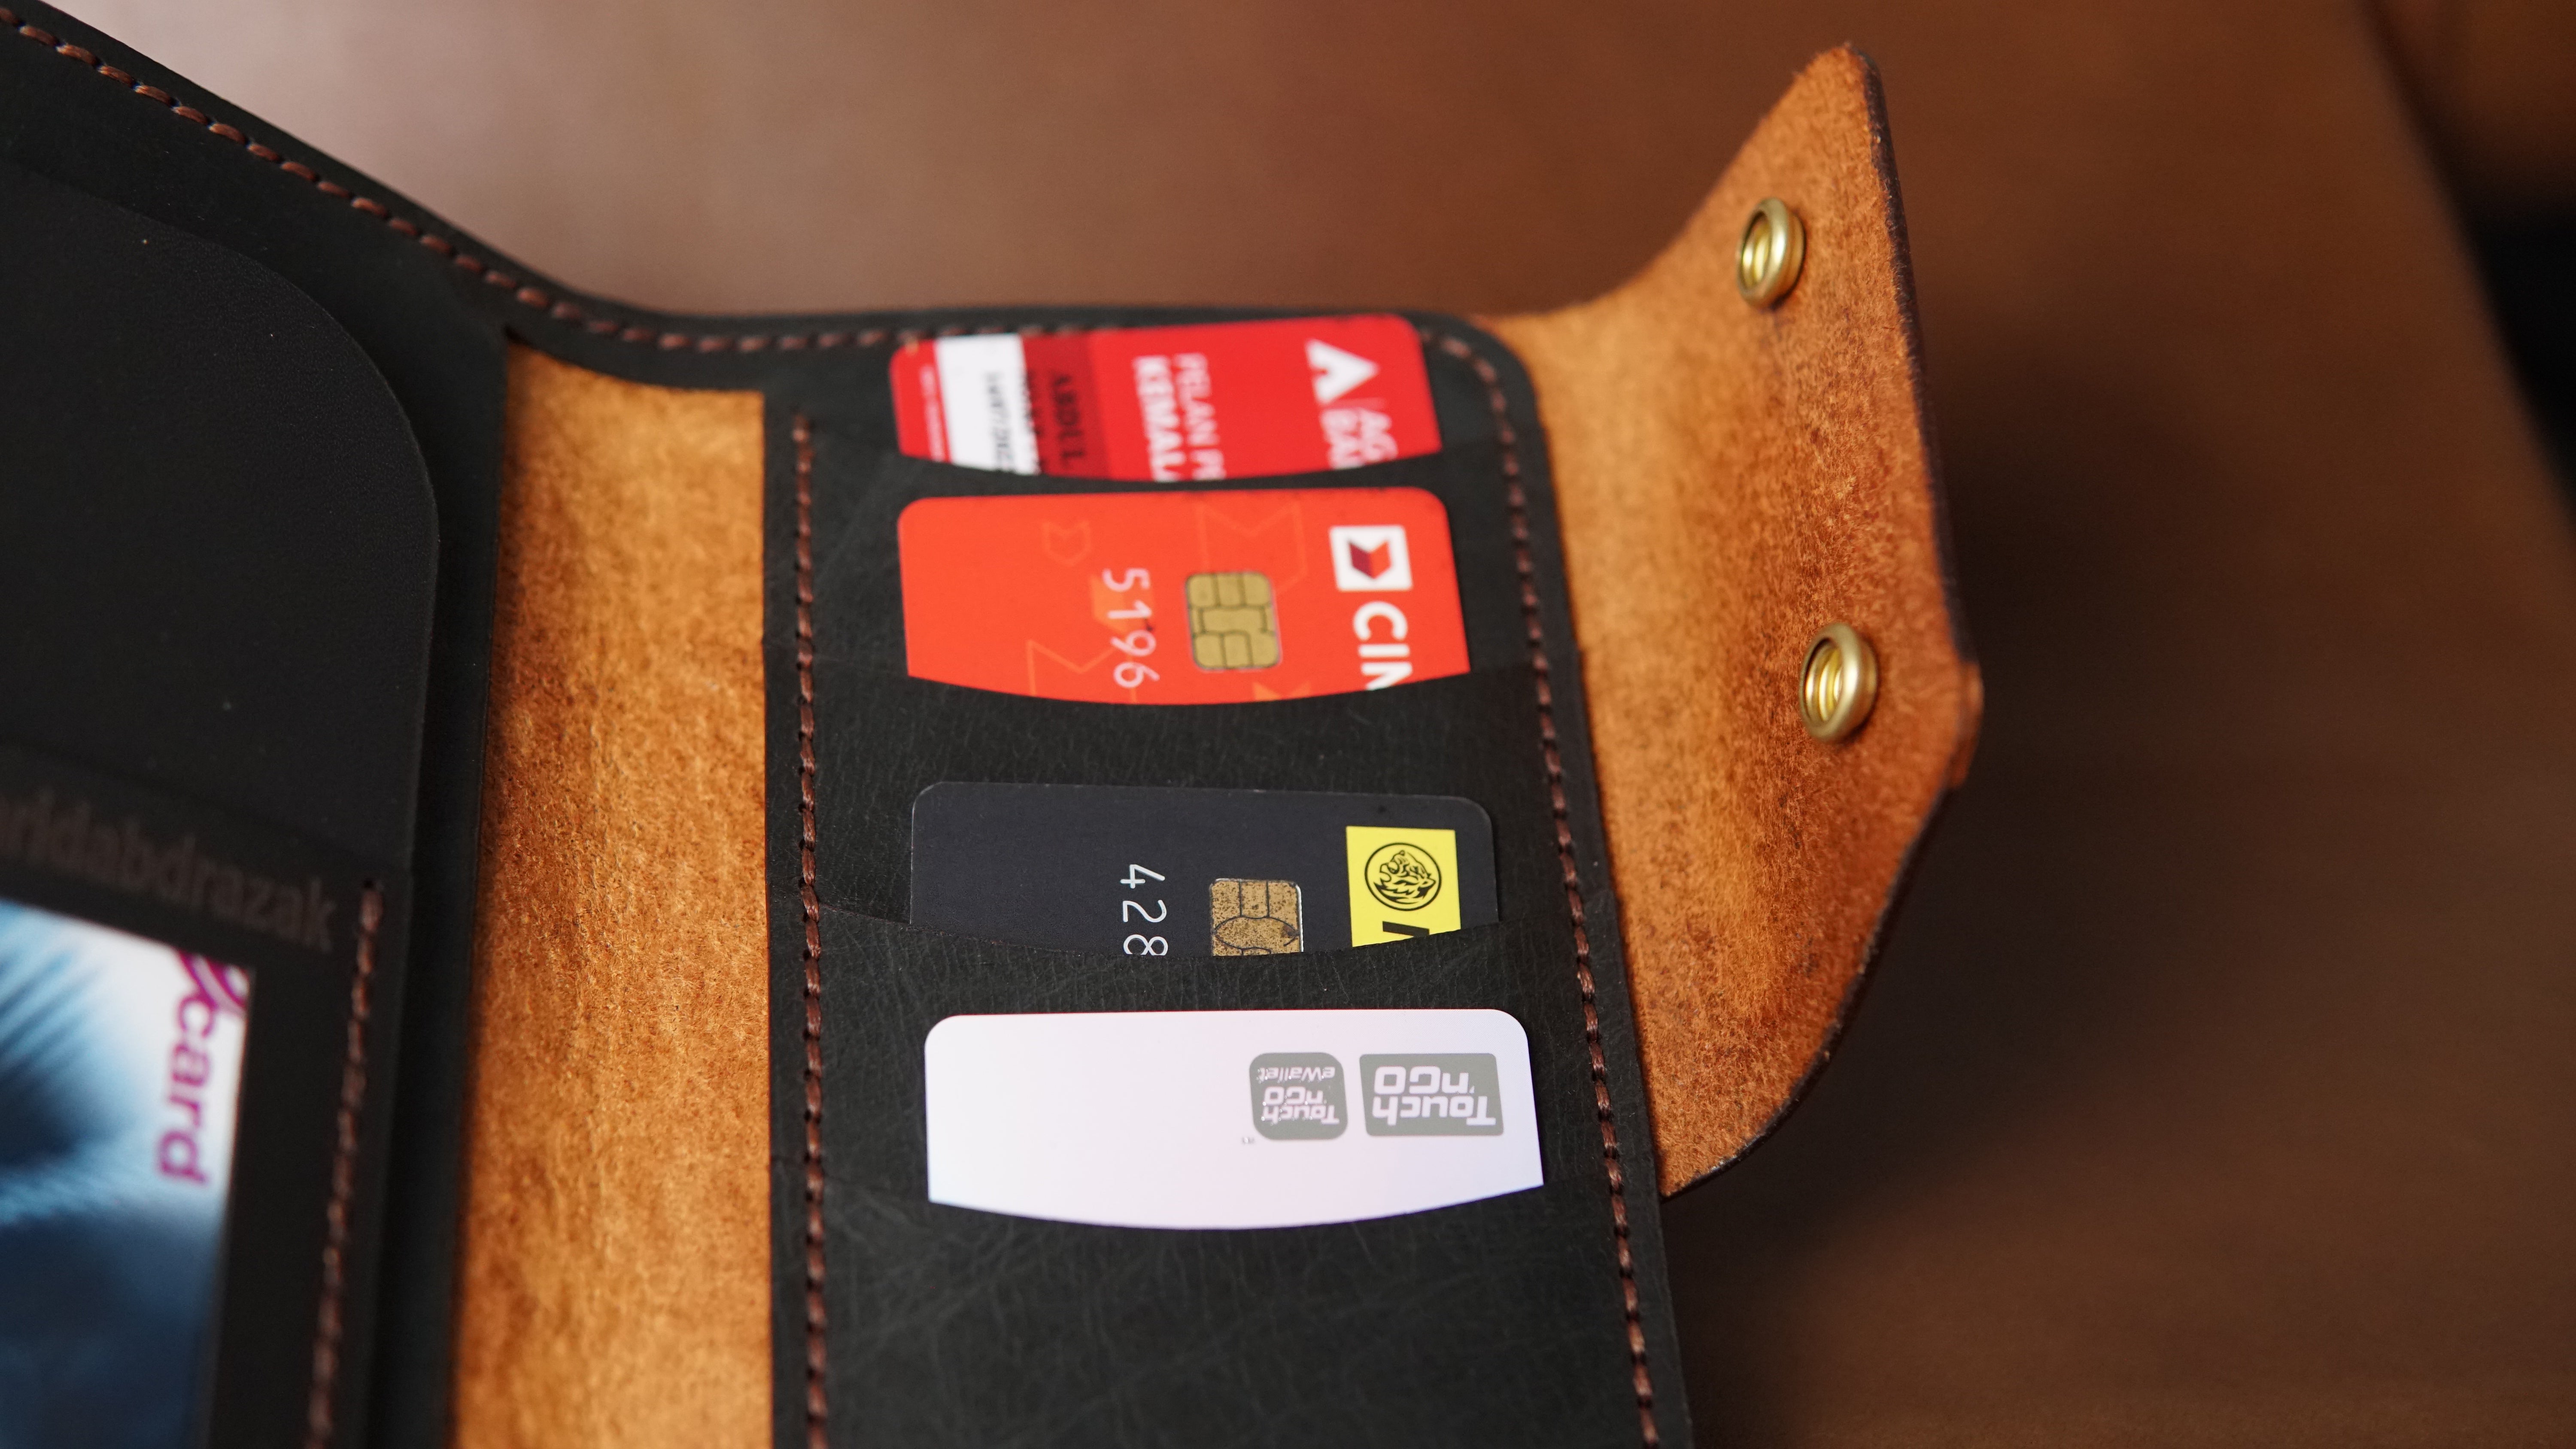 Long Wallet With Button